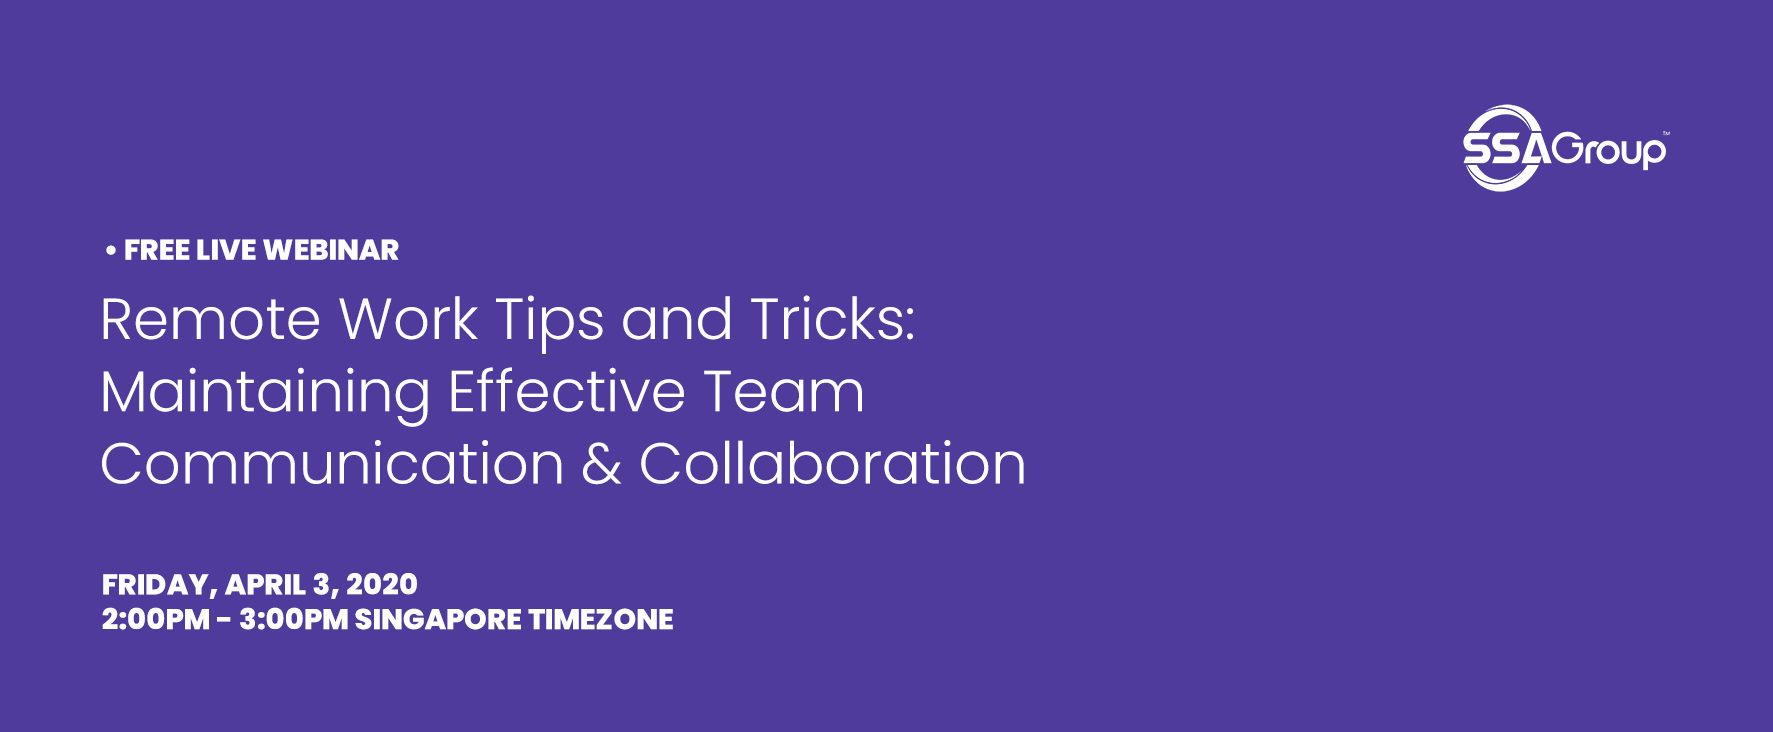 remote-work-tips-and-tricks-maintaining-effective-team-communication-and-collaboration